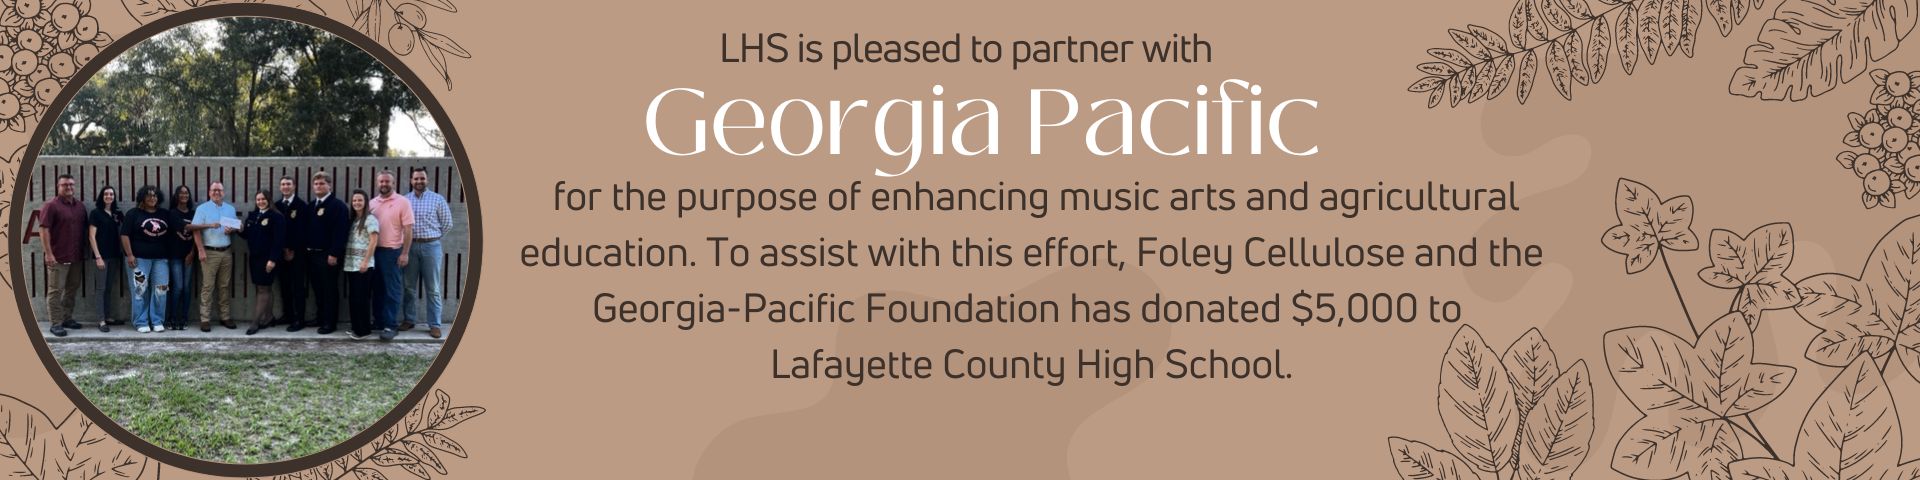 Lafayette County High School is excited to announce a partnership with Georgia-Pacific’s Foley Cellulose mill for the purpose of enhancing music arts and agricultural education. To assist with this effort, Foley Cellulose and the Georgia-Pacific Foundation has donated $5,000 to the Lafayette County High School. 